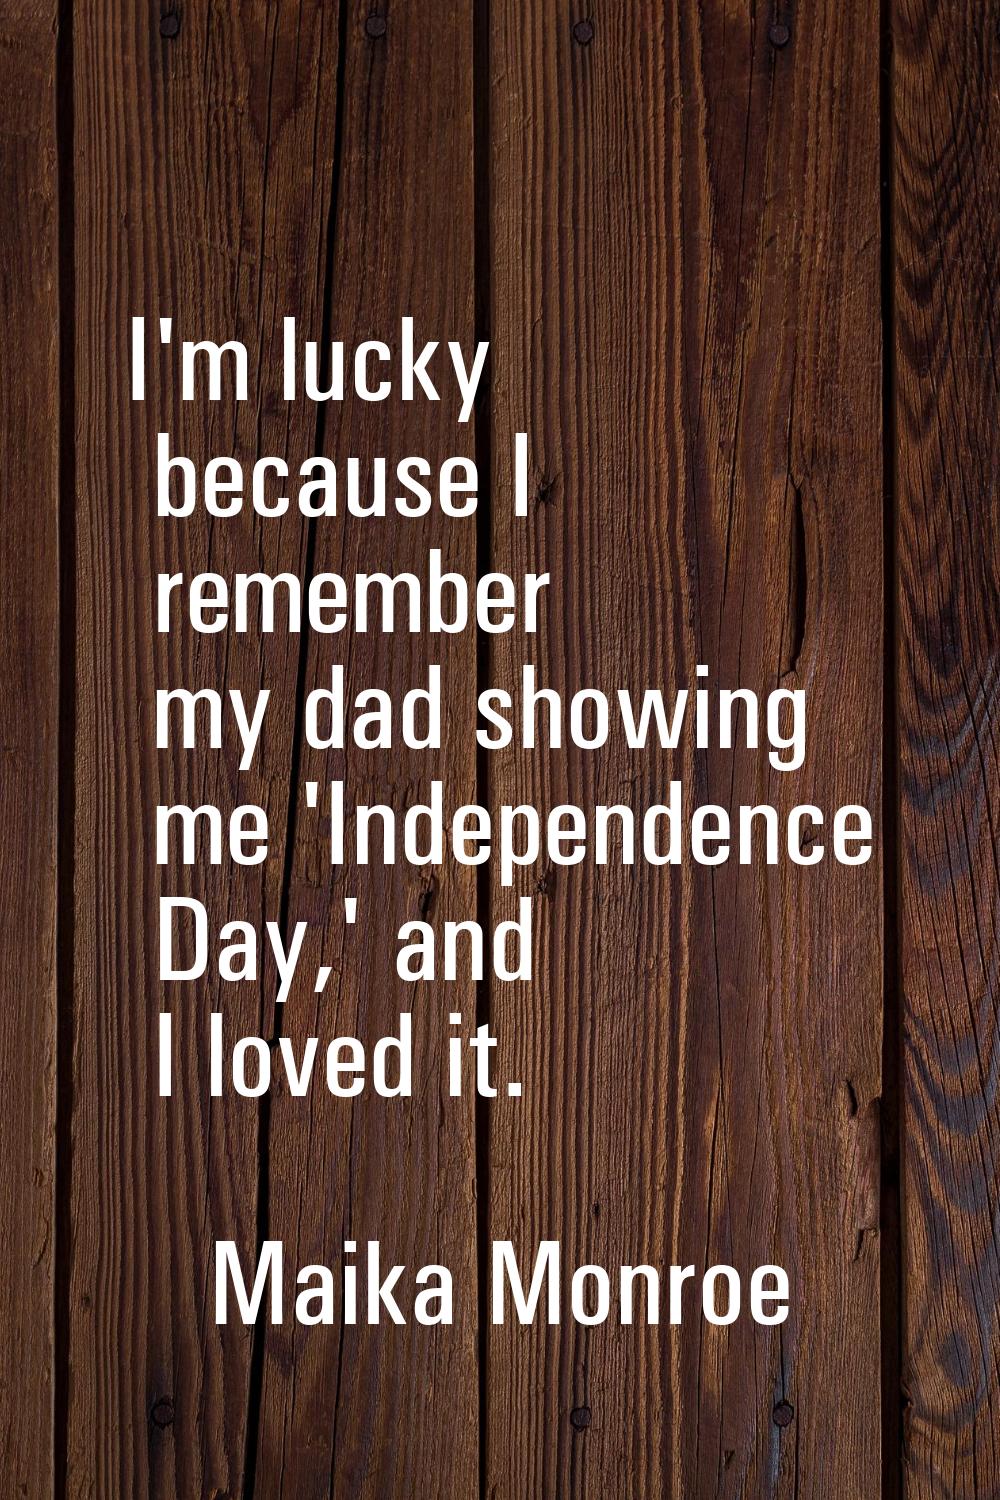 I'm lucky because I remember my dad showing me 'Independence Day,' and I loved it.